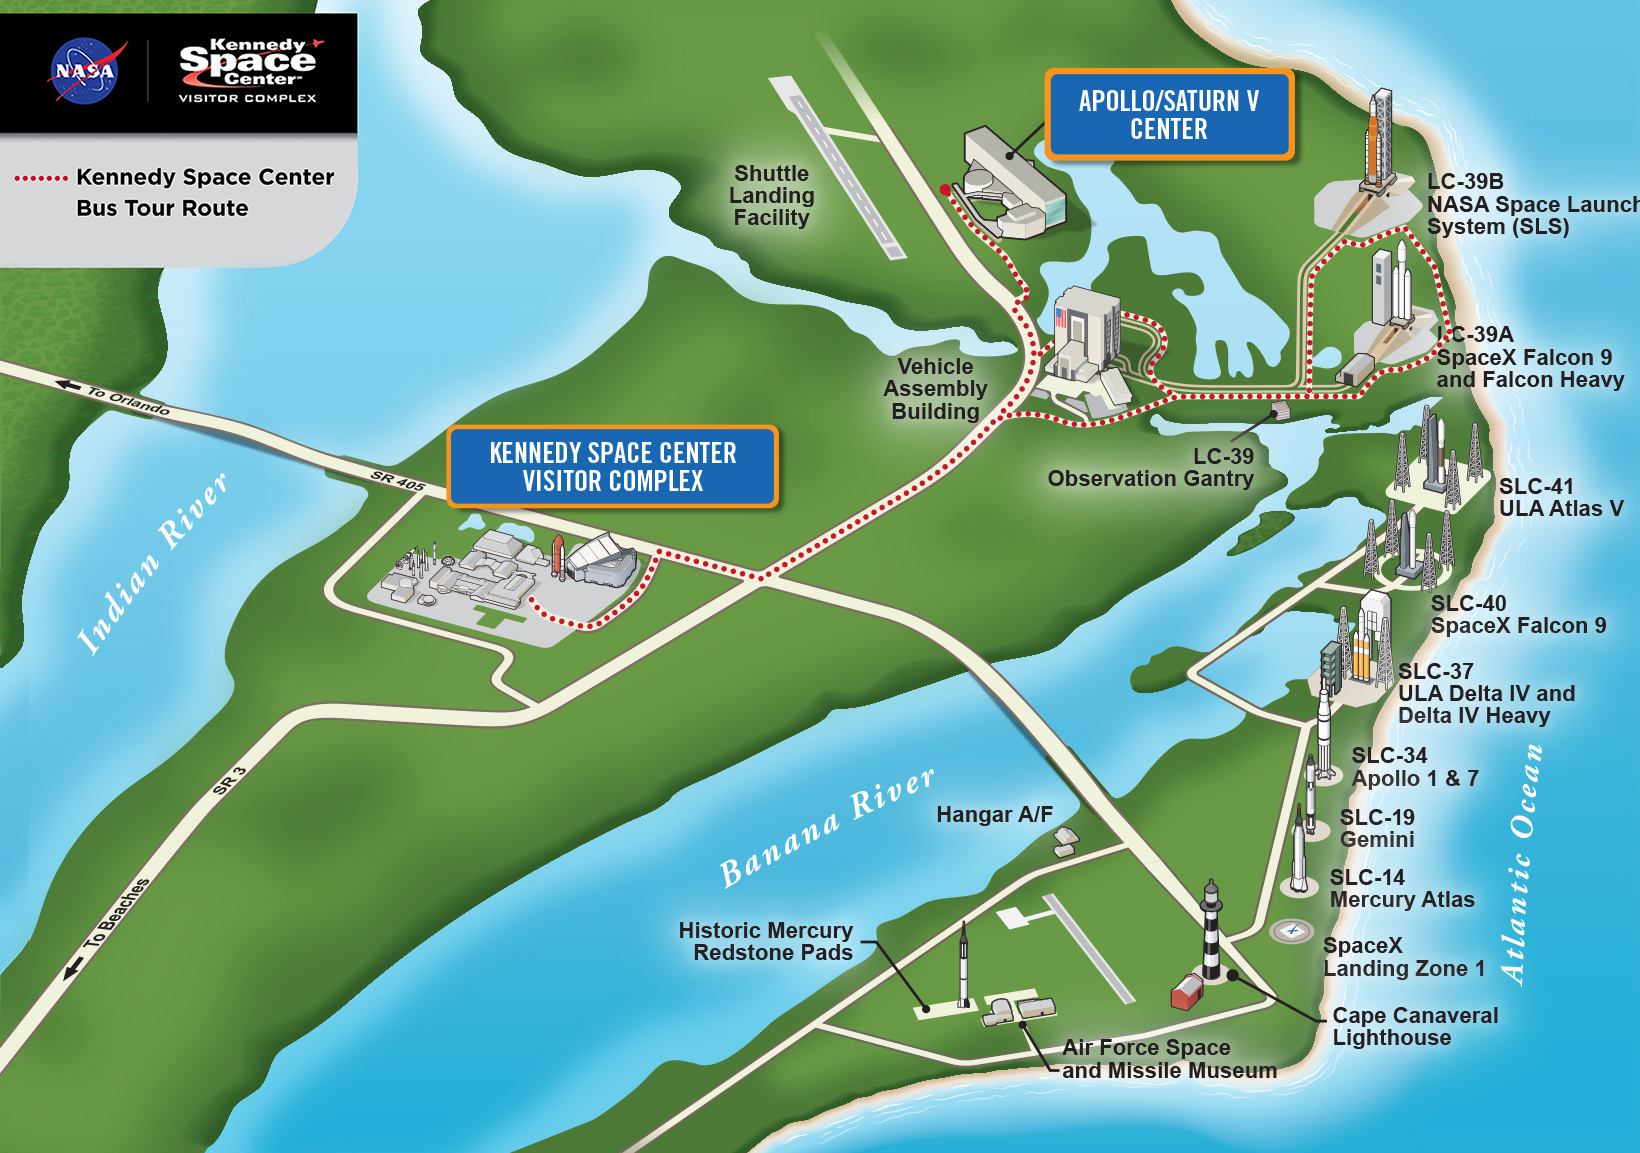 kennedy-space-center-visitor-complex-maps